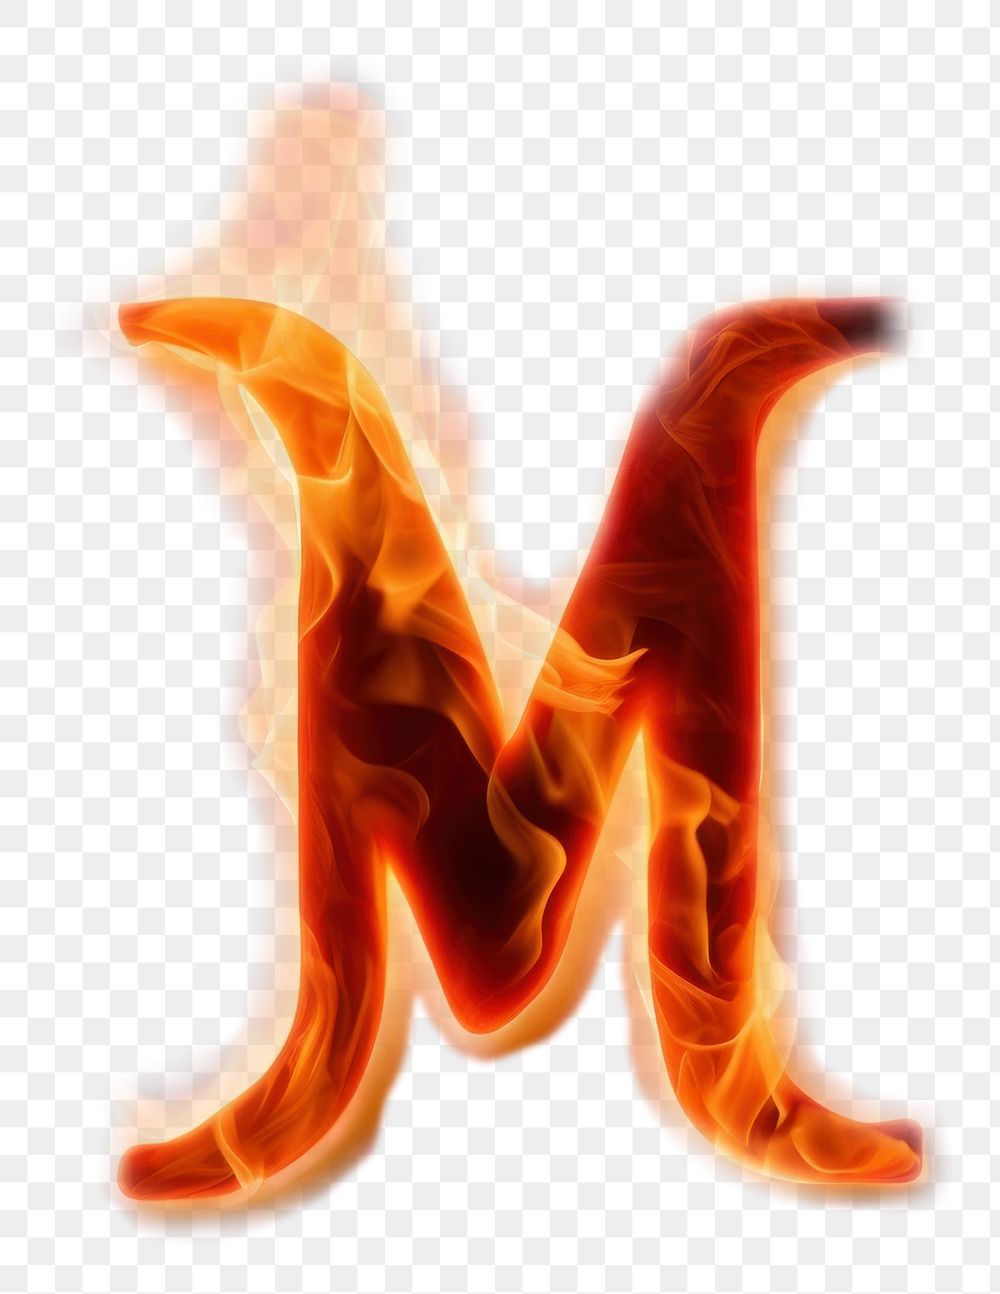 Burning letter M fire glowing burning.